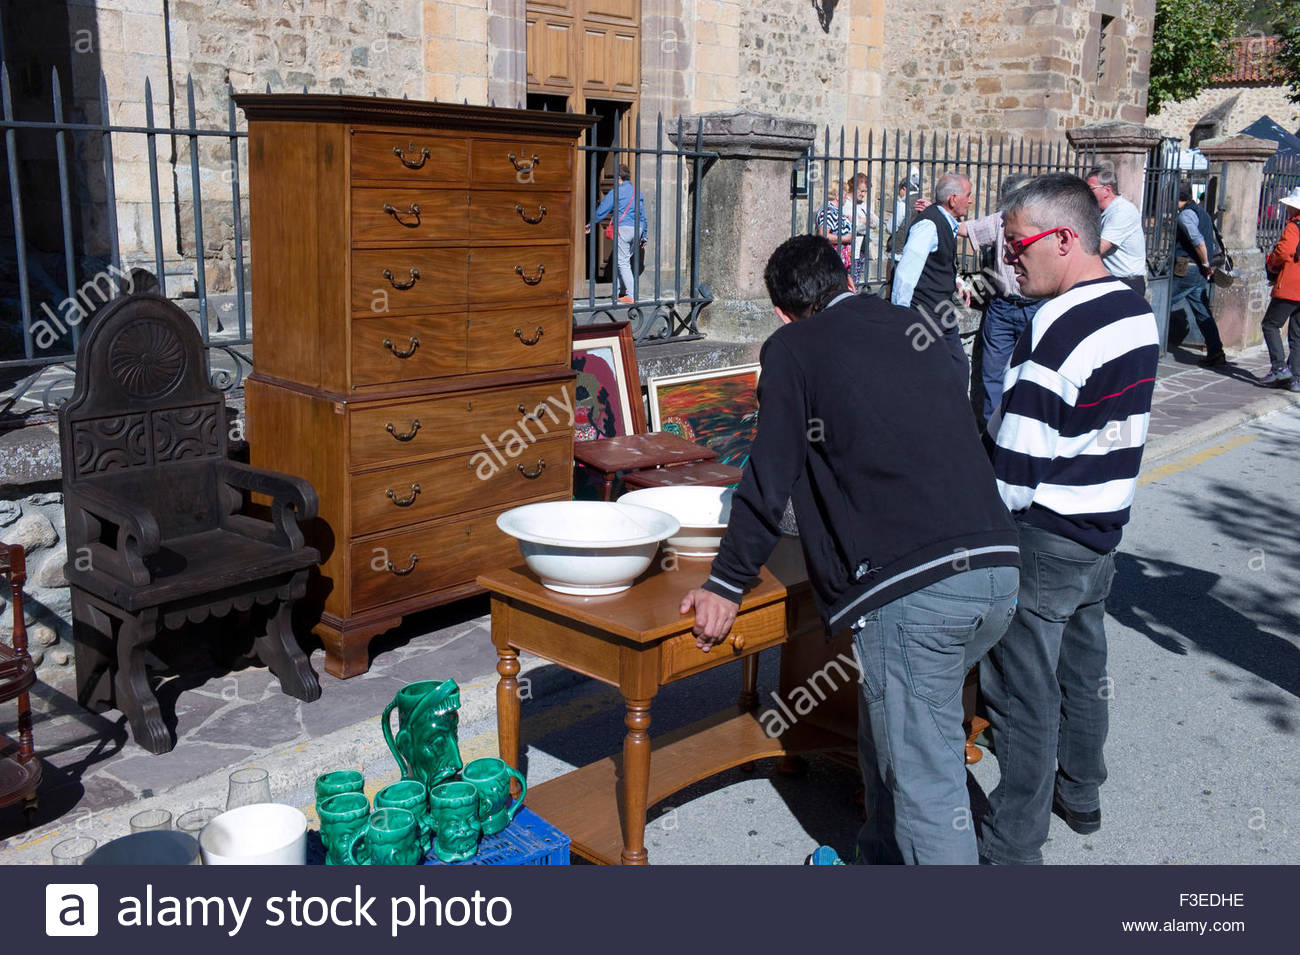 Selling Antique Furniture In The The Street Market In The Medieval